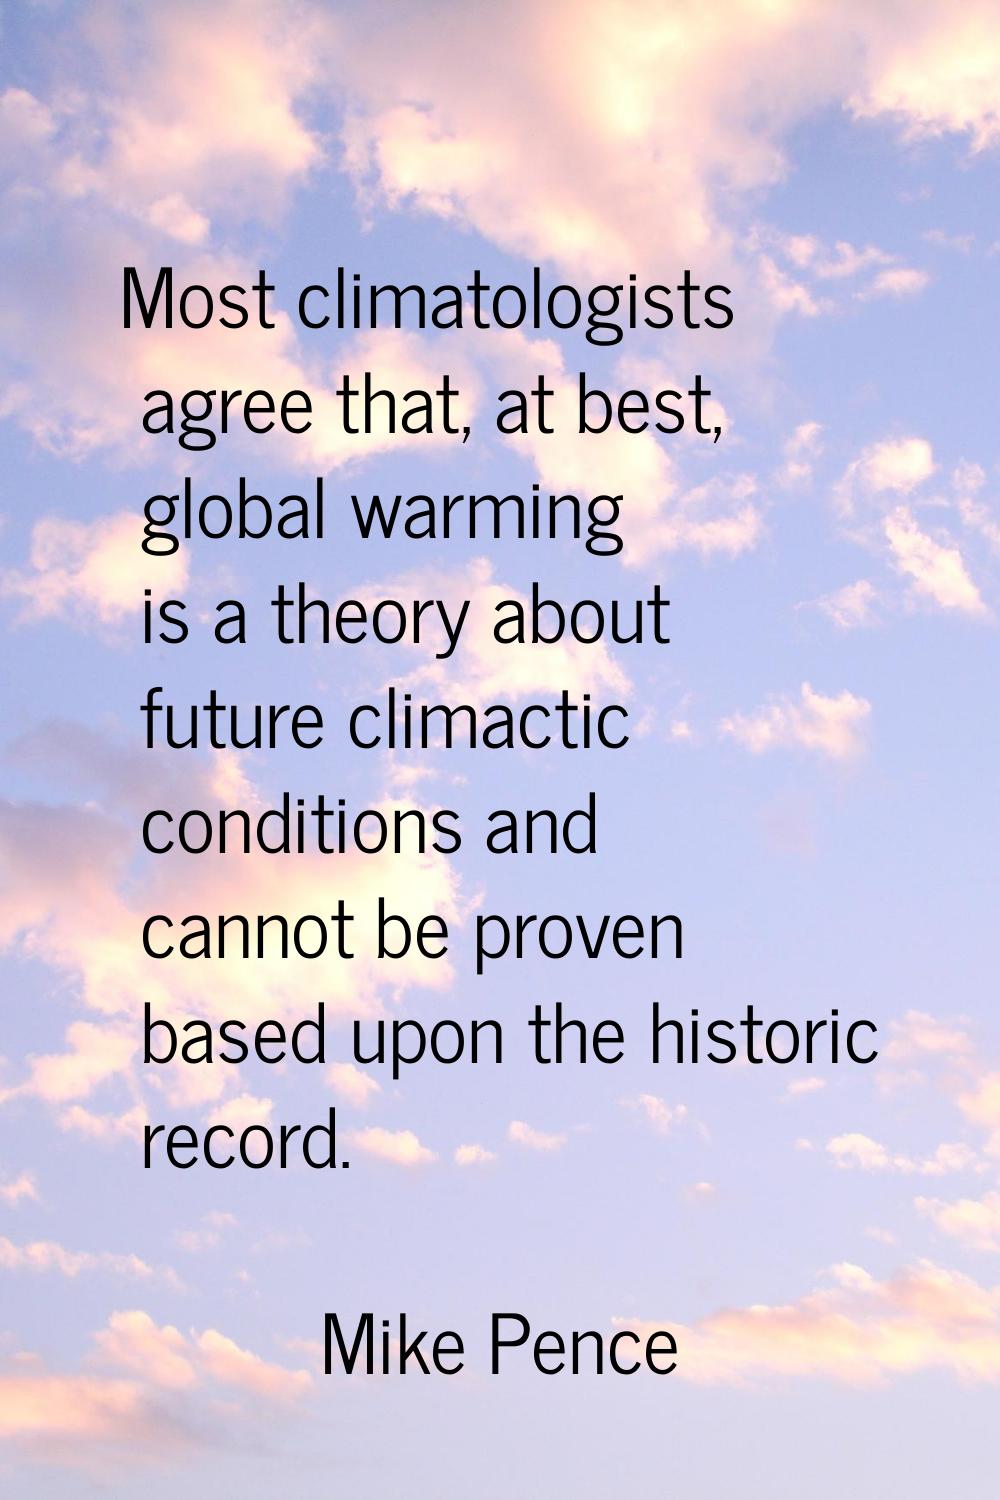 Most climatologists agree that, at best, global warming is a theory about future climactic conditio